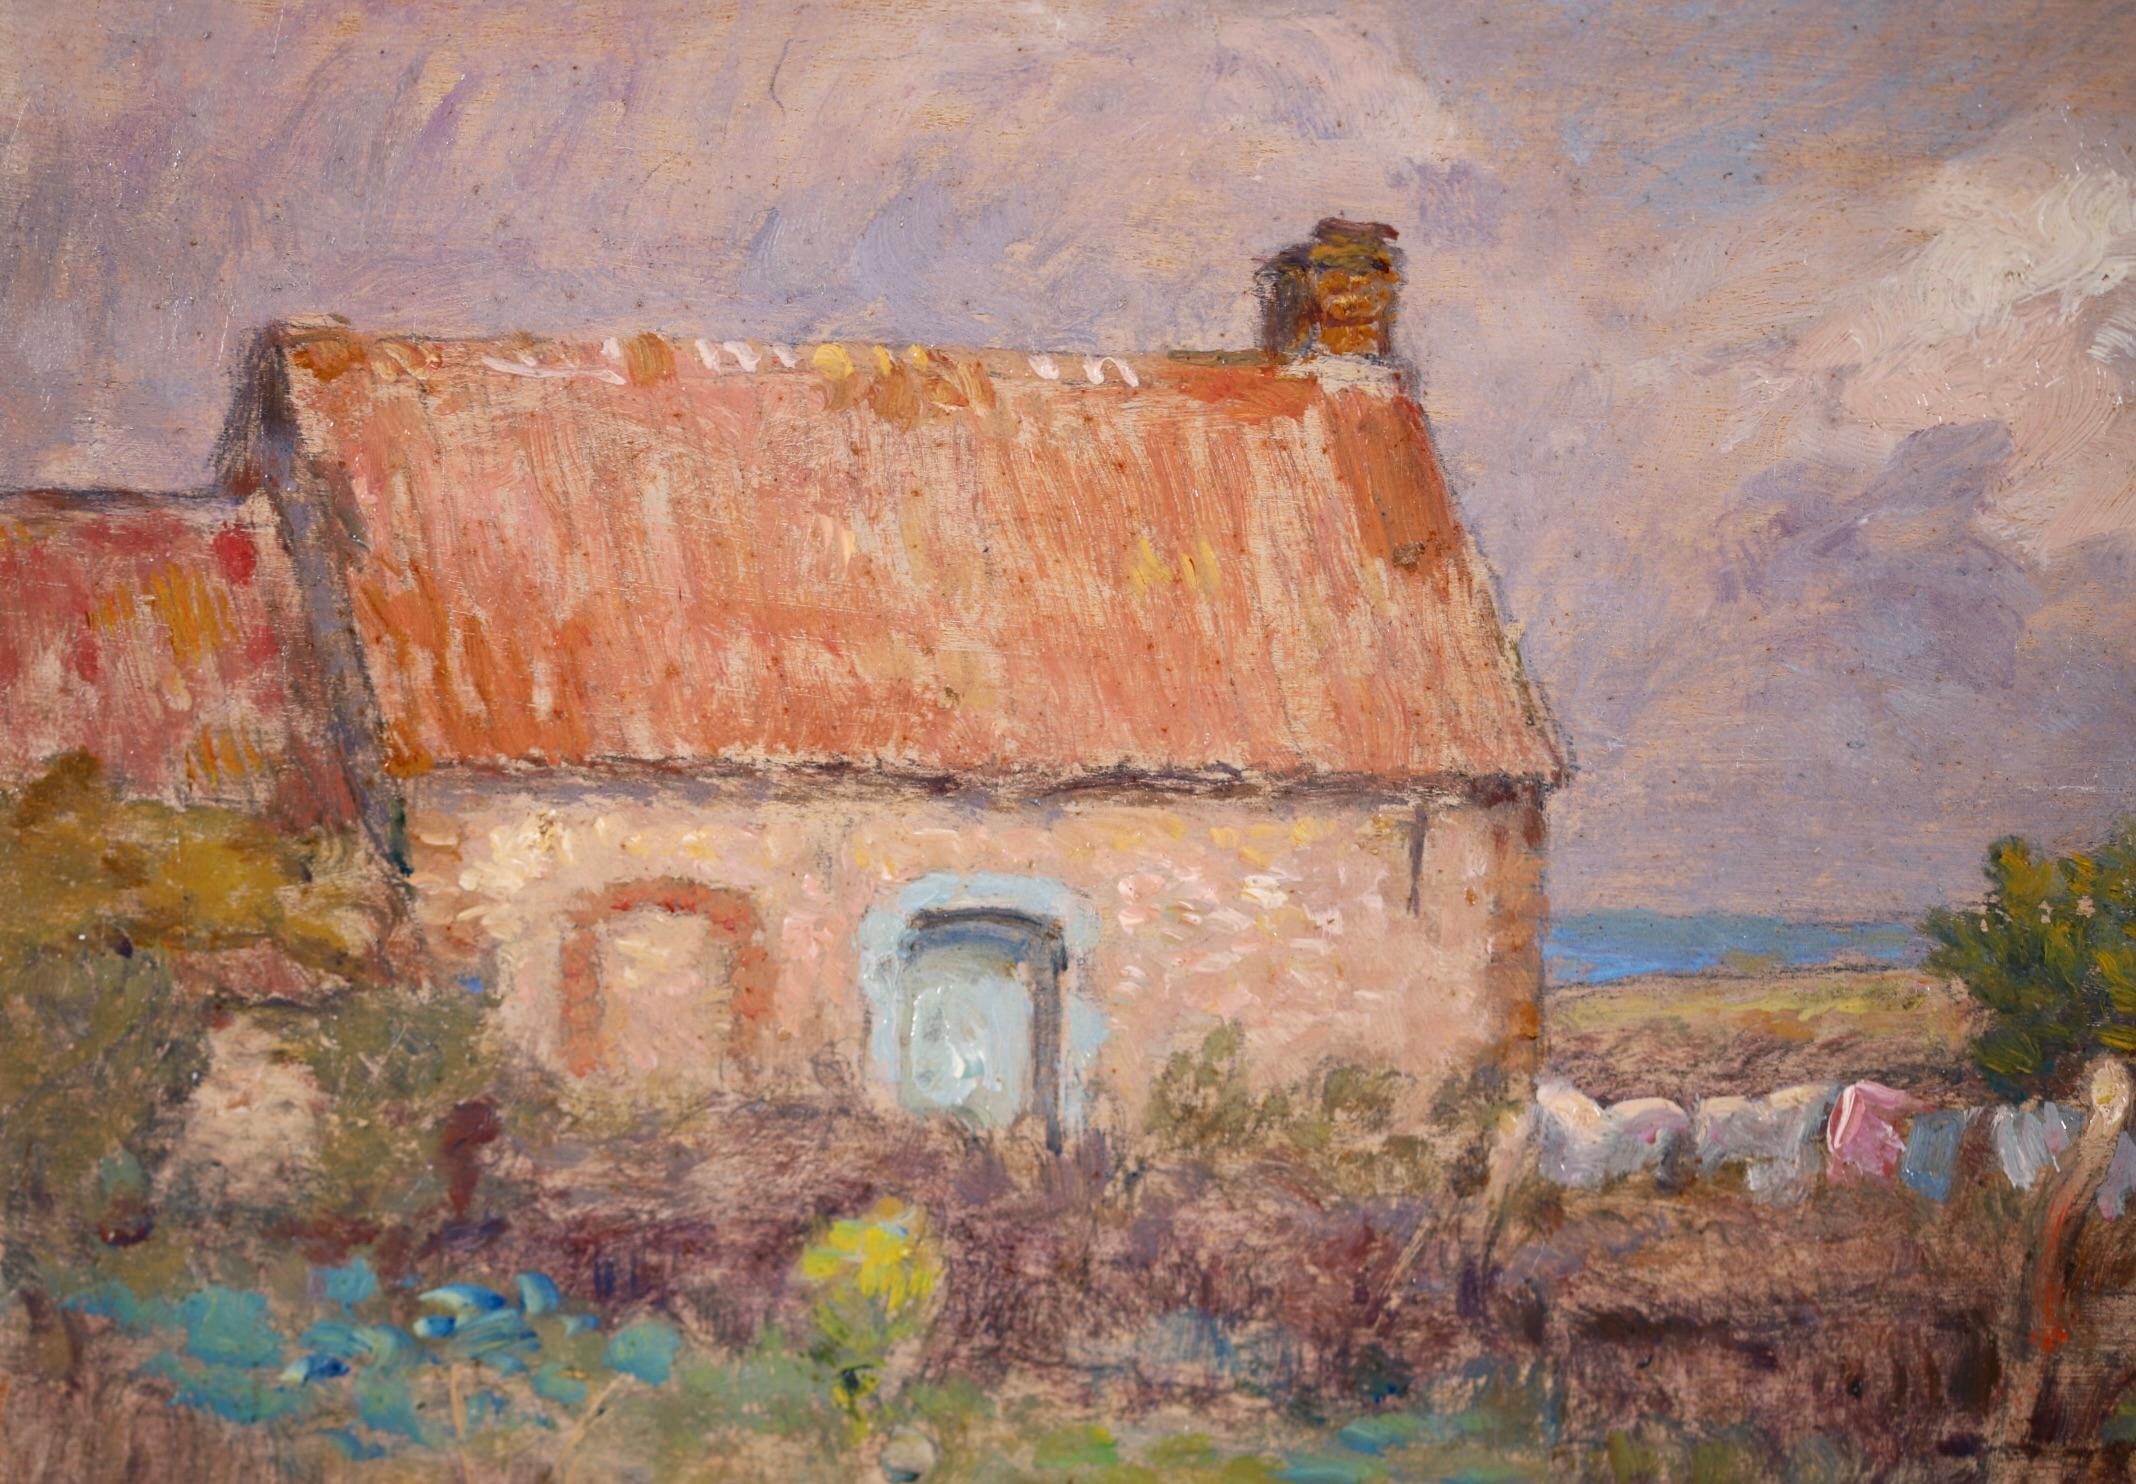 Drying Washing - French Impressionist Oil, Cottage in Landscape by Marie Duhem 1